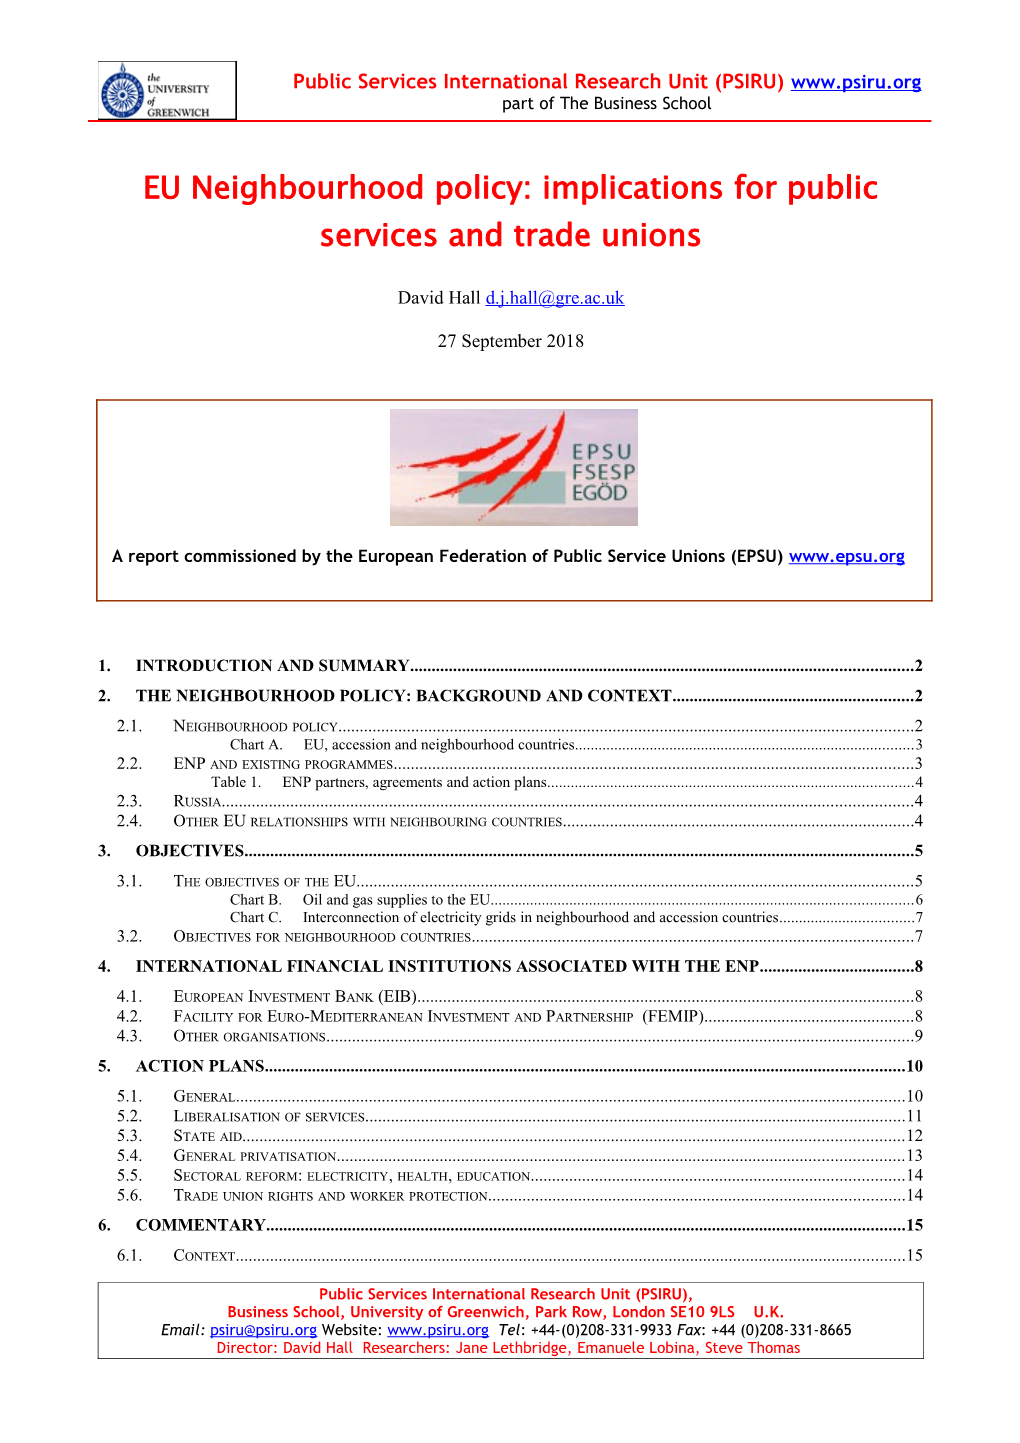 EU Neighbourhood Policy: Implications for Public Services and Trade Unions